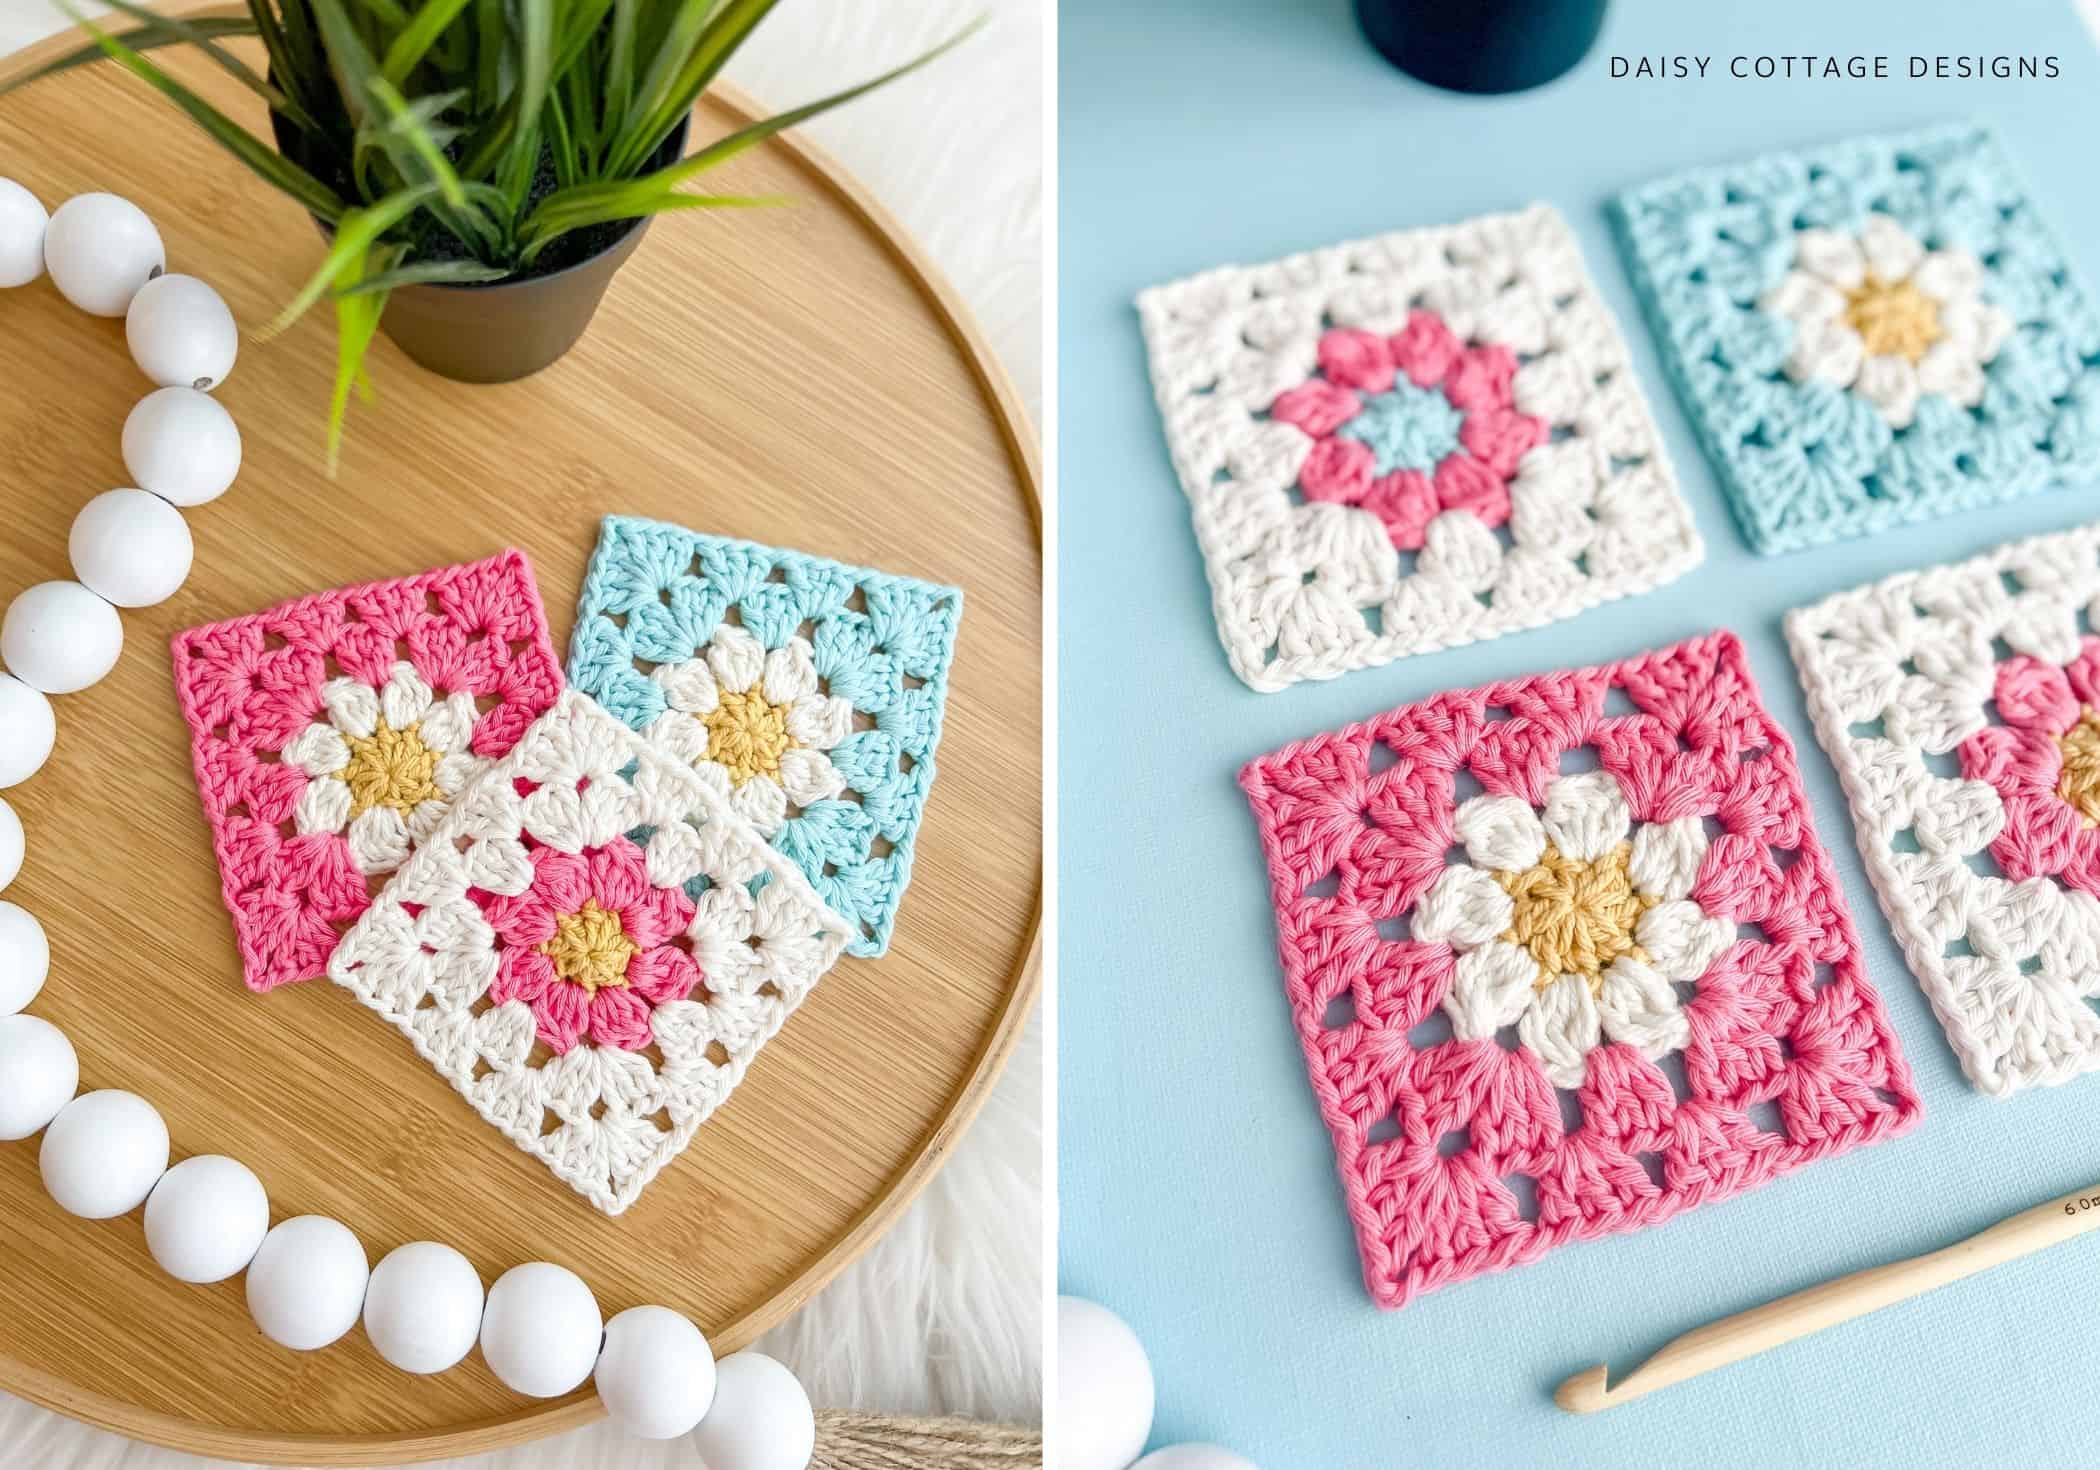 Granny squares with daisy centers